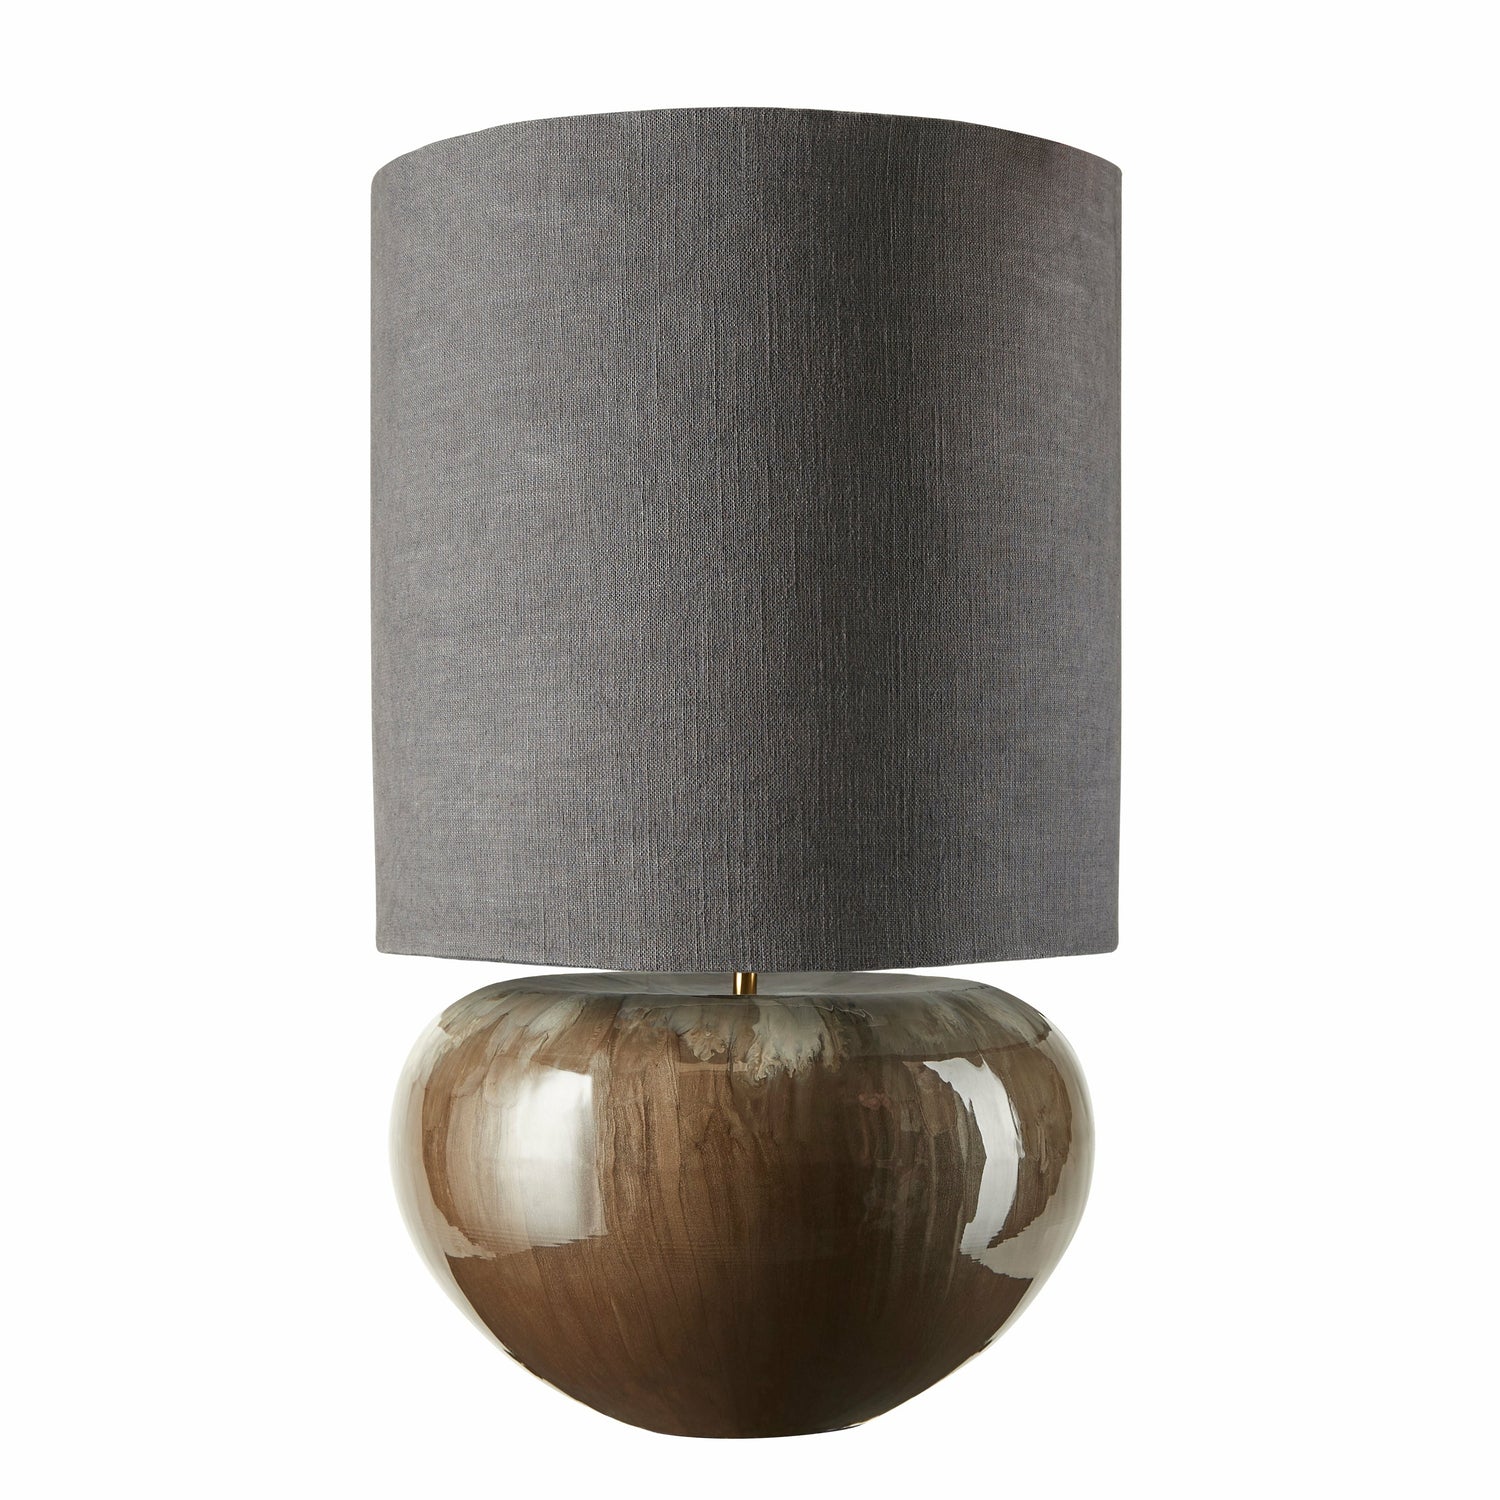 Cozy Living Ena emaillierte Lampe TAUPE m. Farbton - Groß*